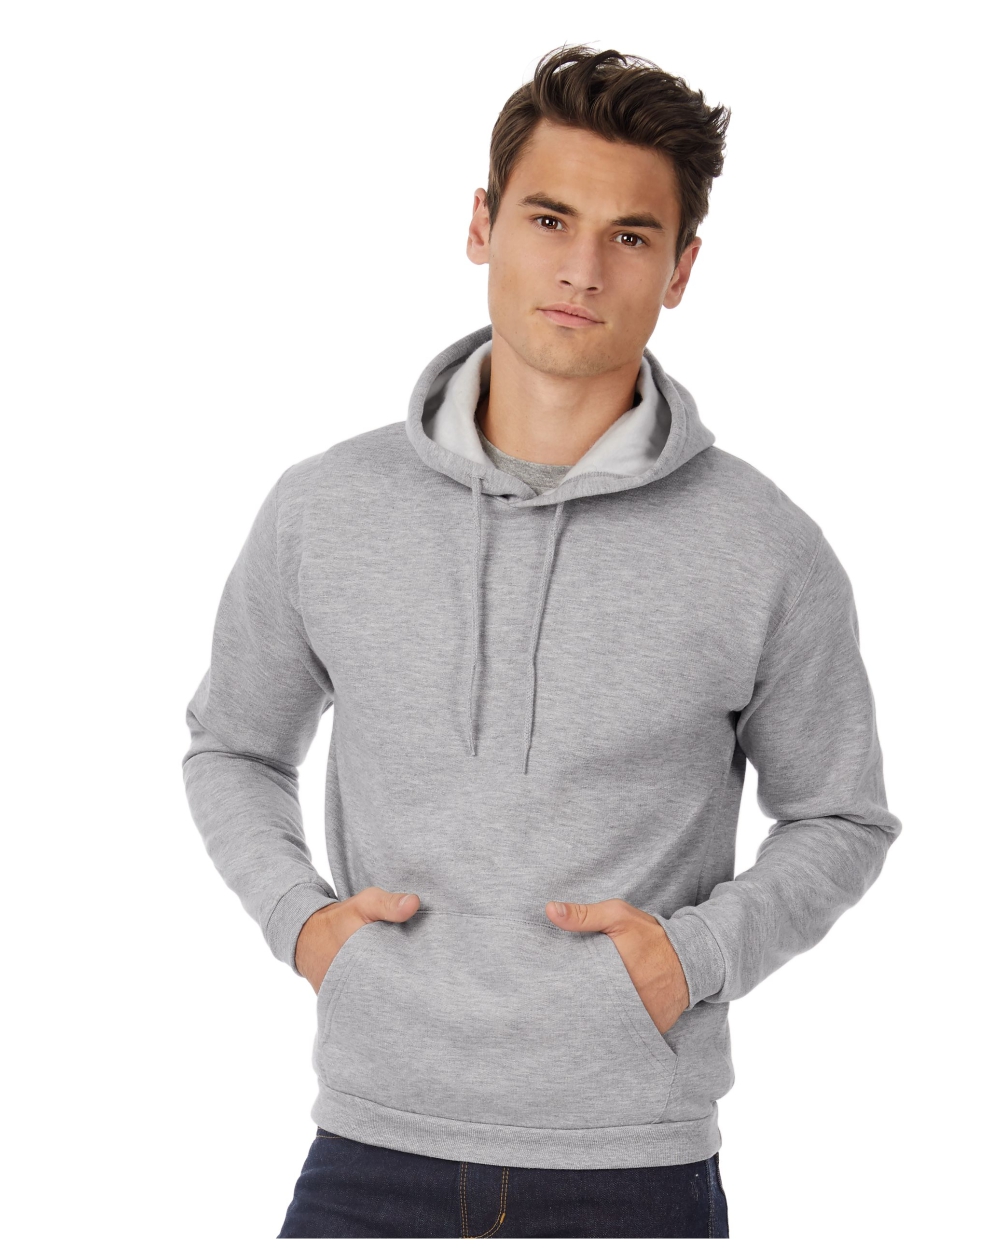 B&C WUI24 Pullover Hoody (WUI24) - LA Safety Supplies